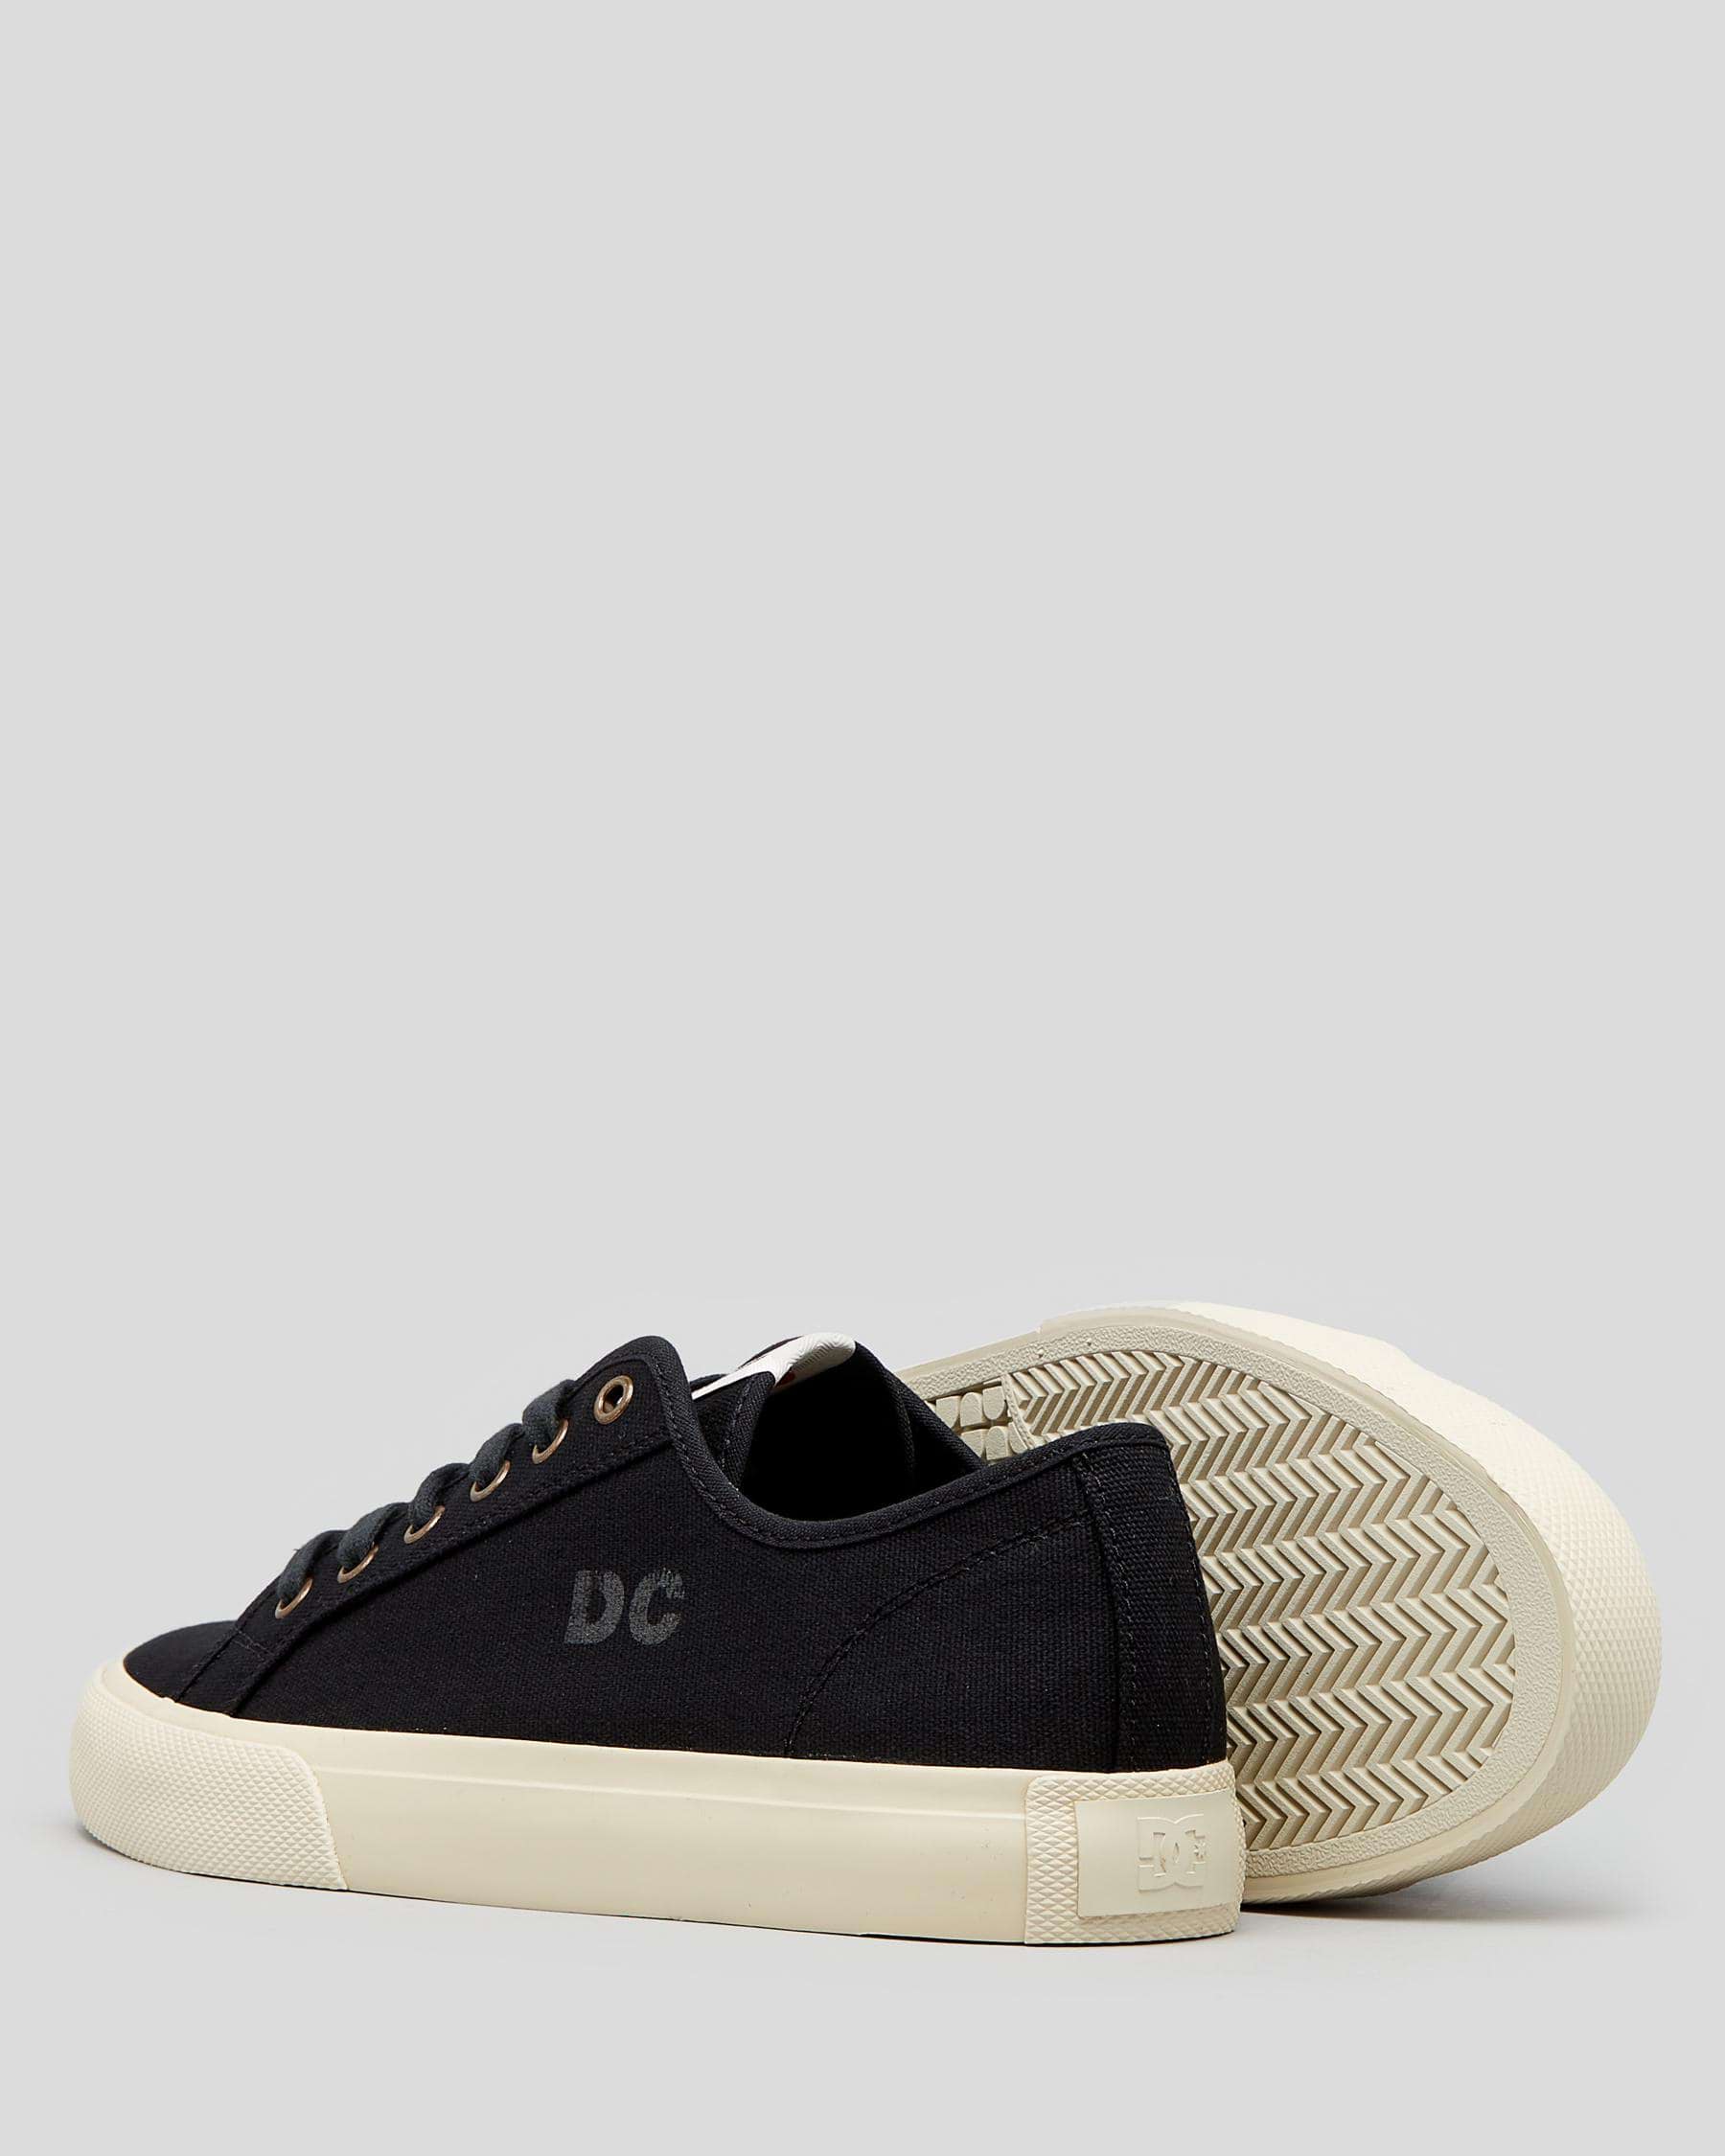 Shop DC Shoes Manual SVM Shoes In Overdye Black - Fast Shipping & Easy ...